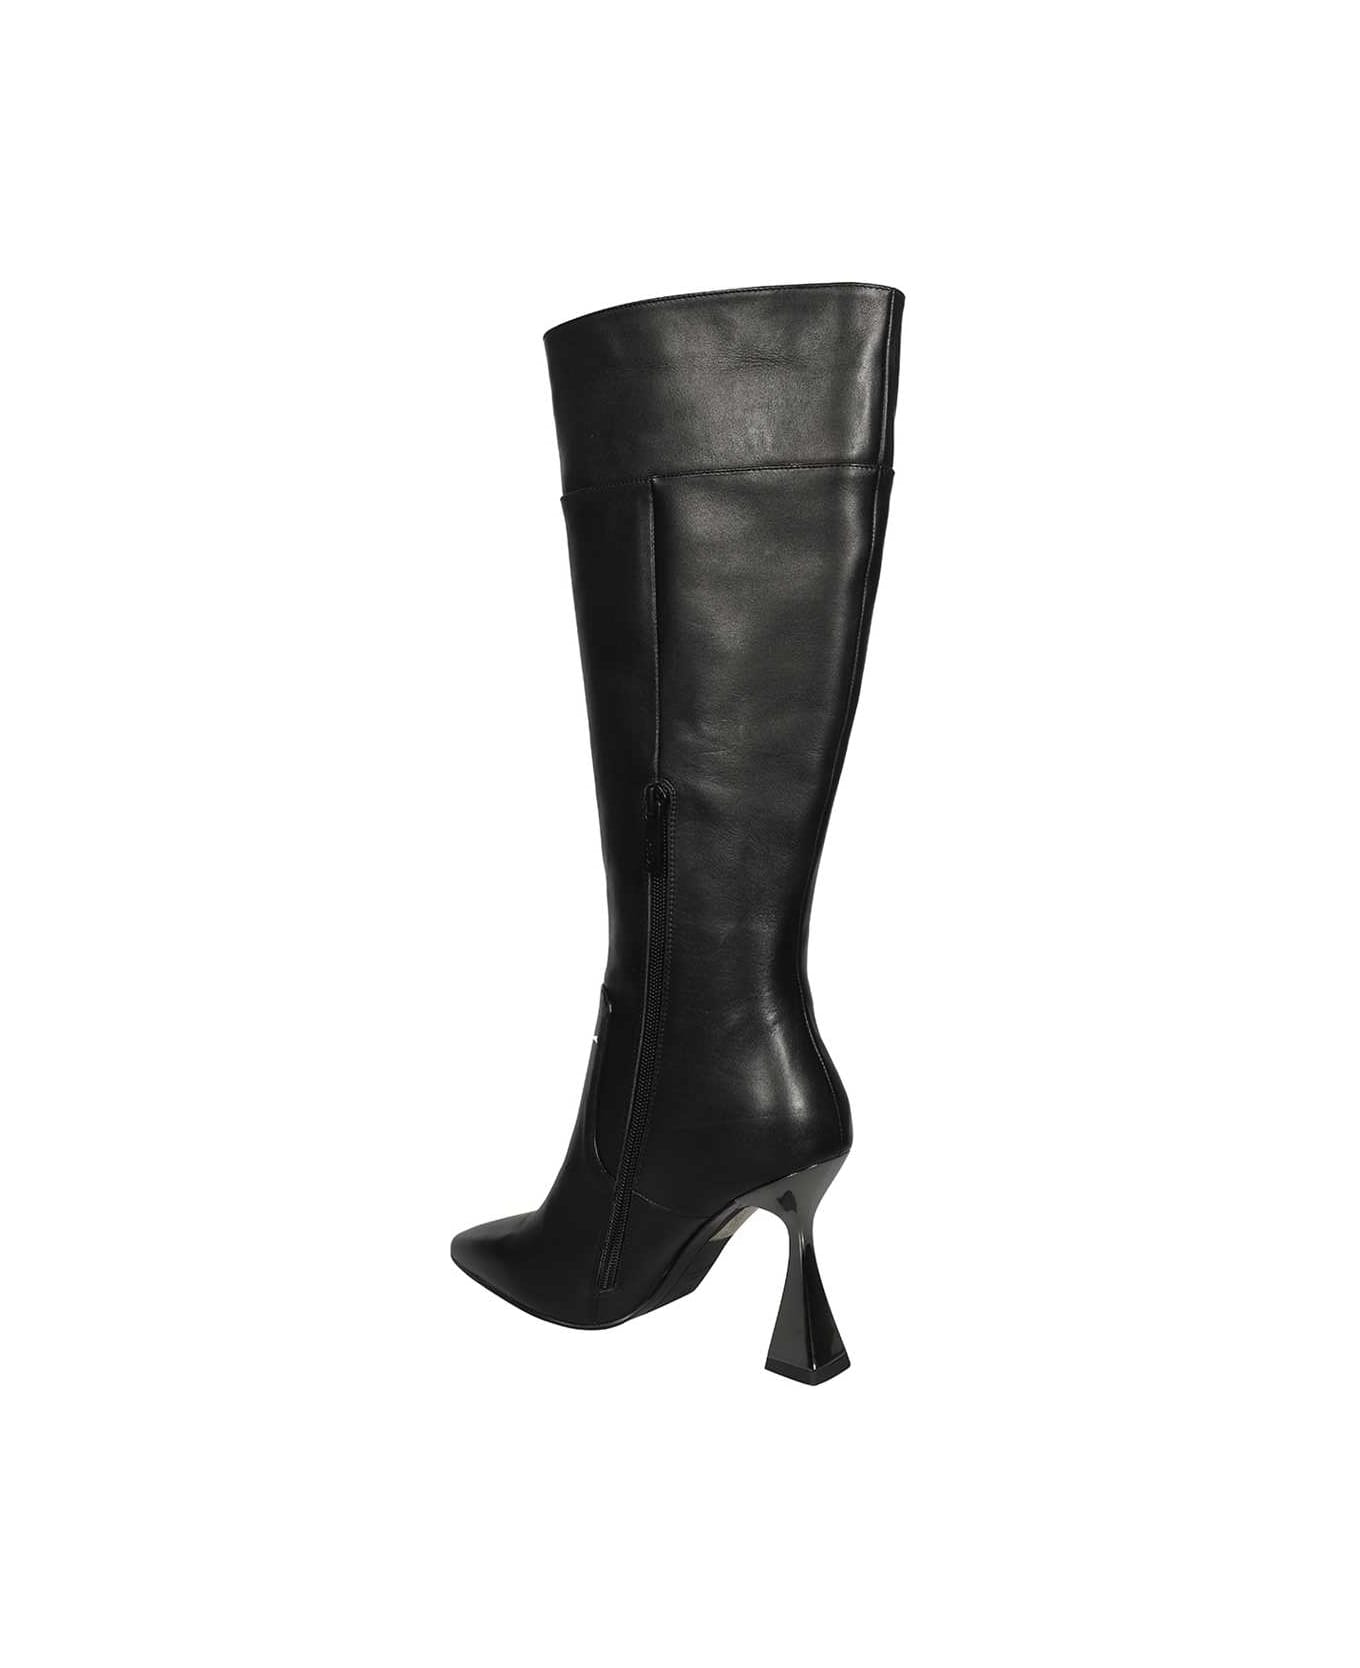 Karl Lagerfeld Leather Boots - black